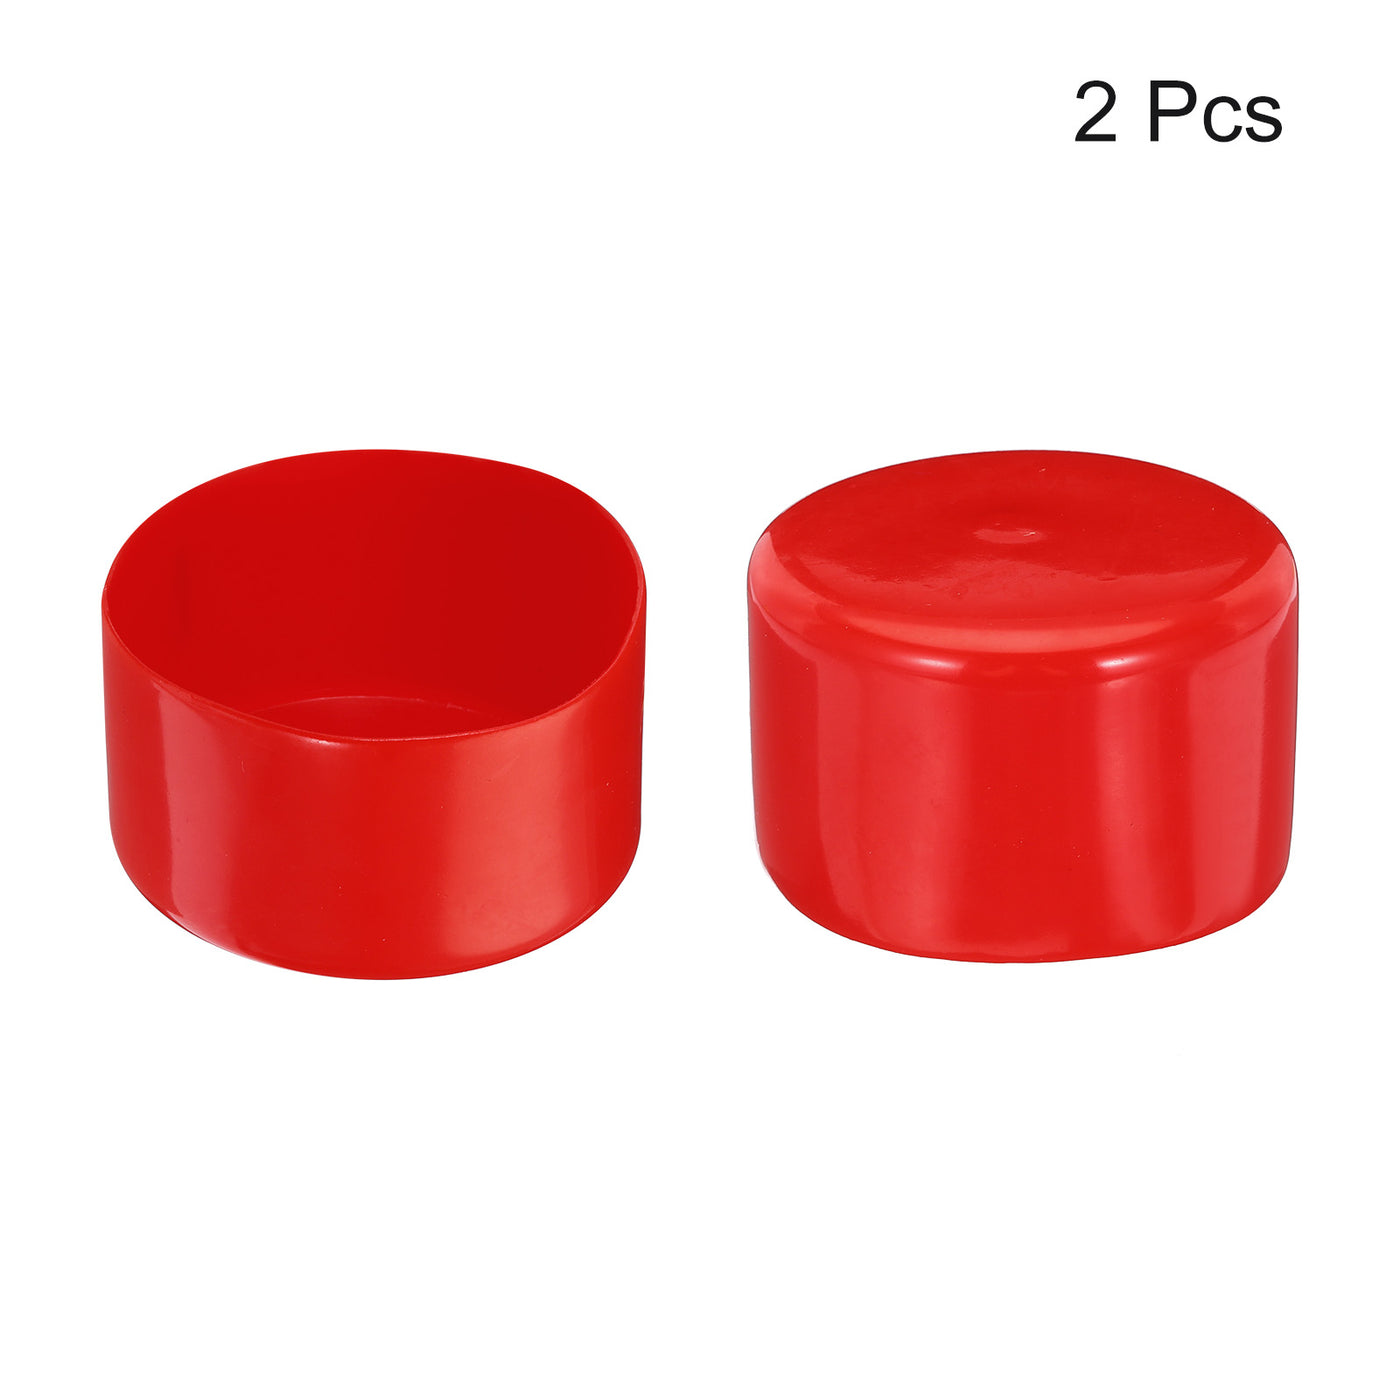 uxcell Uxcell 2pcs Rubber End Caps 70mm ID Vinyl Round Tube Bolt Cap Cover Screw Thread Protectors Red